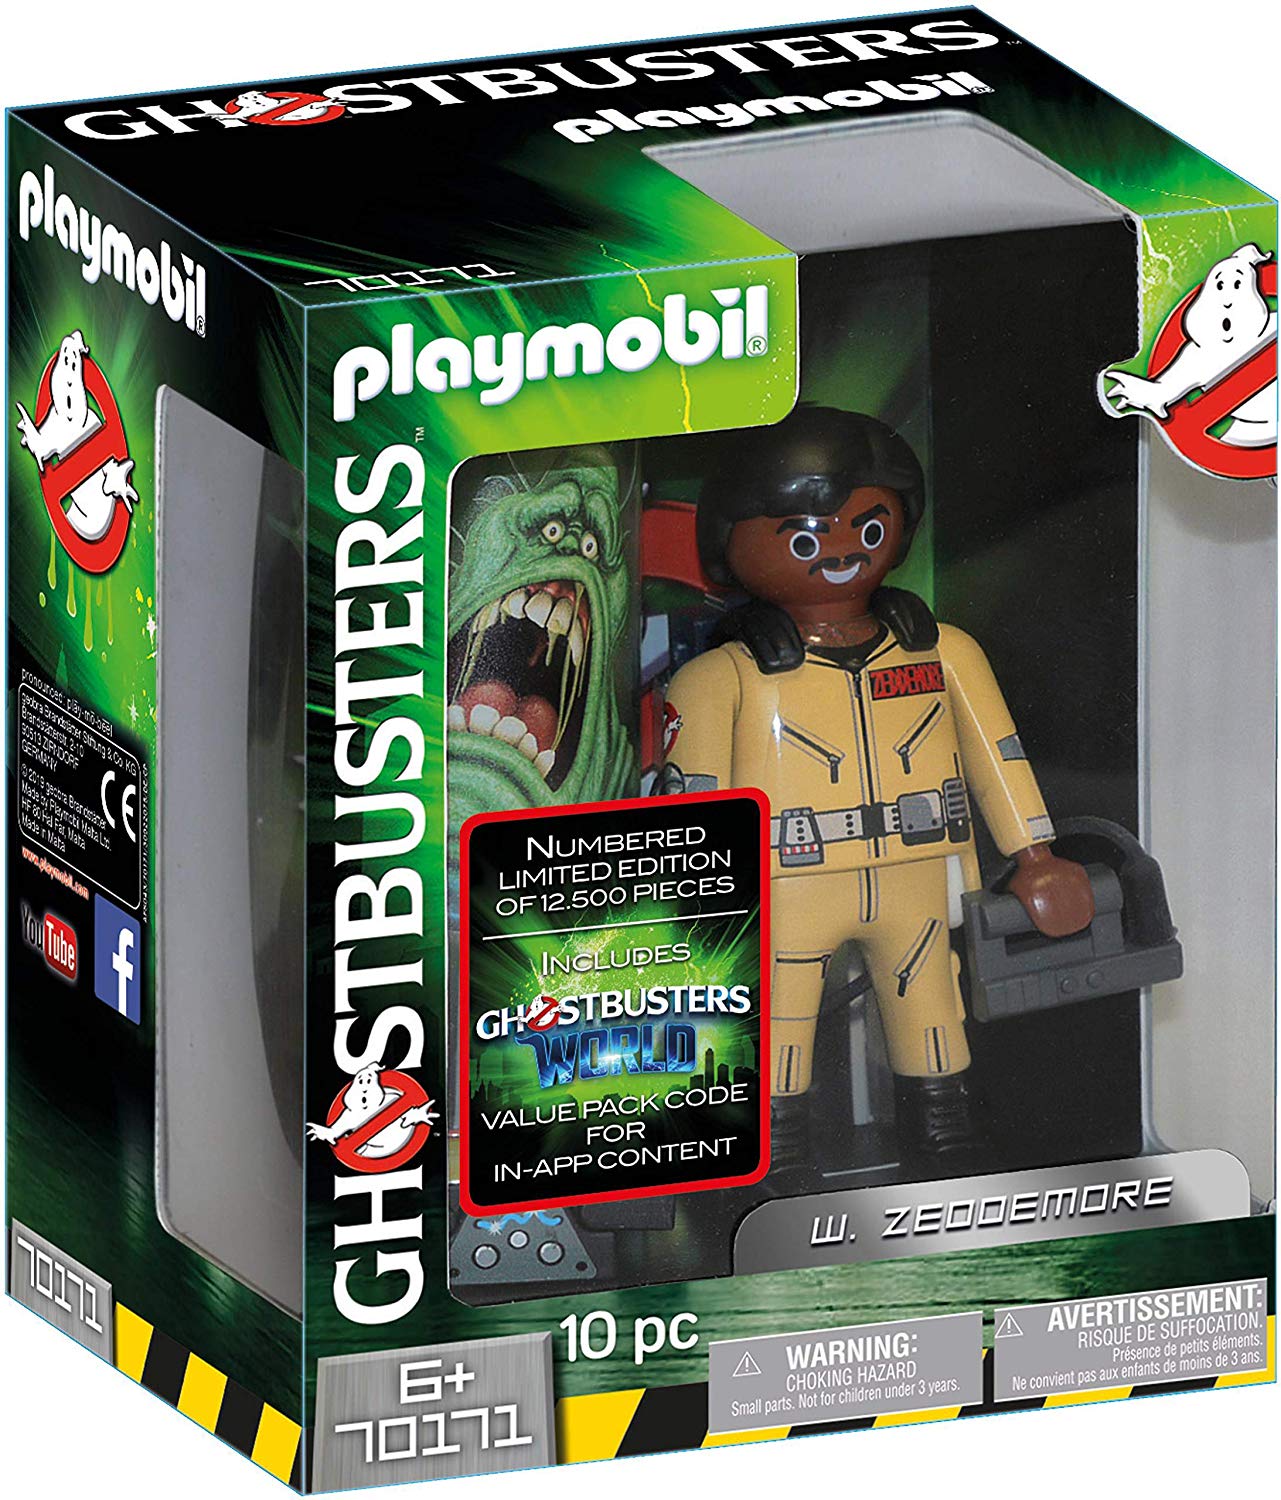 Playmobil 70171 Ghostbusters Collectable Figurine W. Zeddemore Colourful